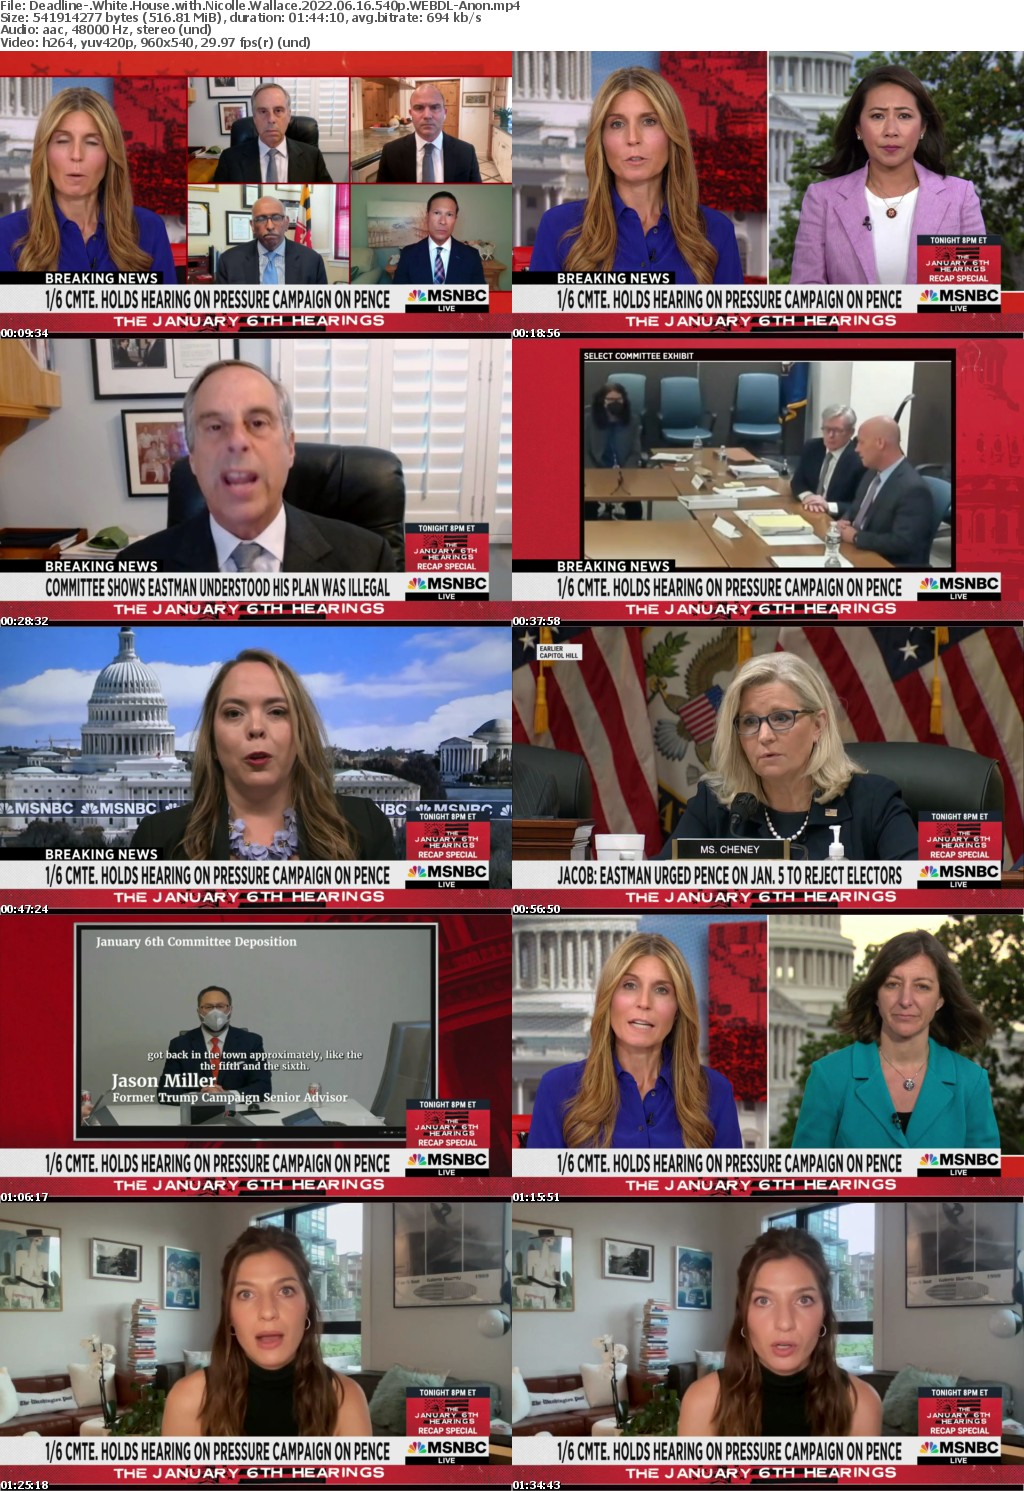 Deadline- White House with Nicolle Wallace 2022 06 16 540p WEBDL-Anon